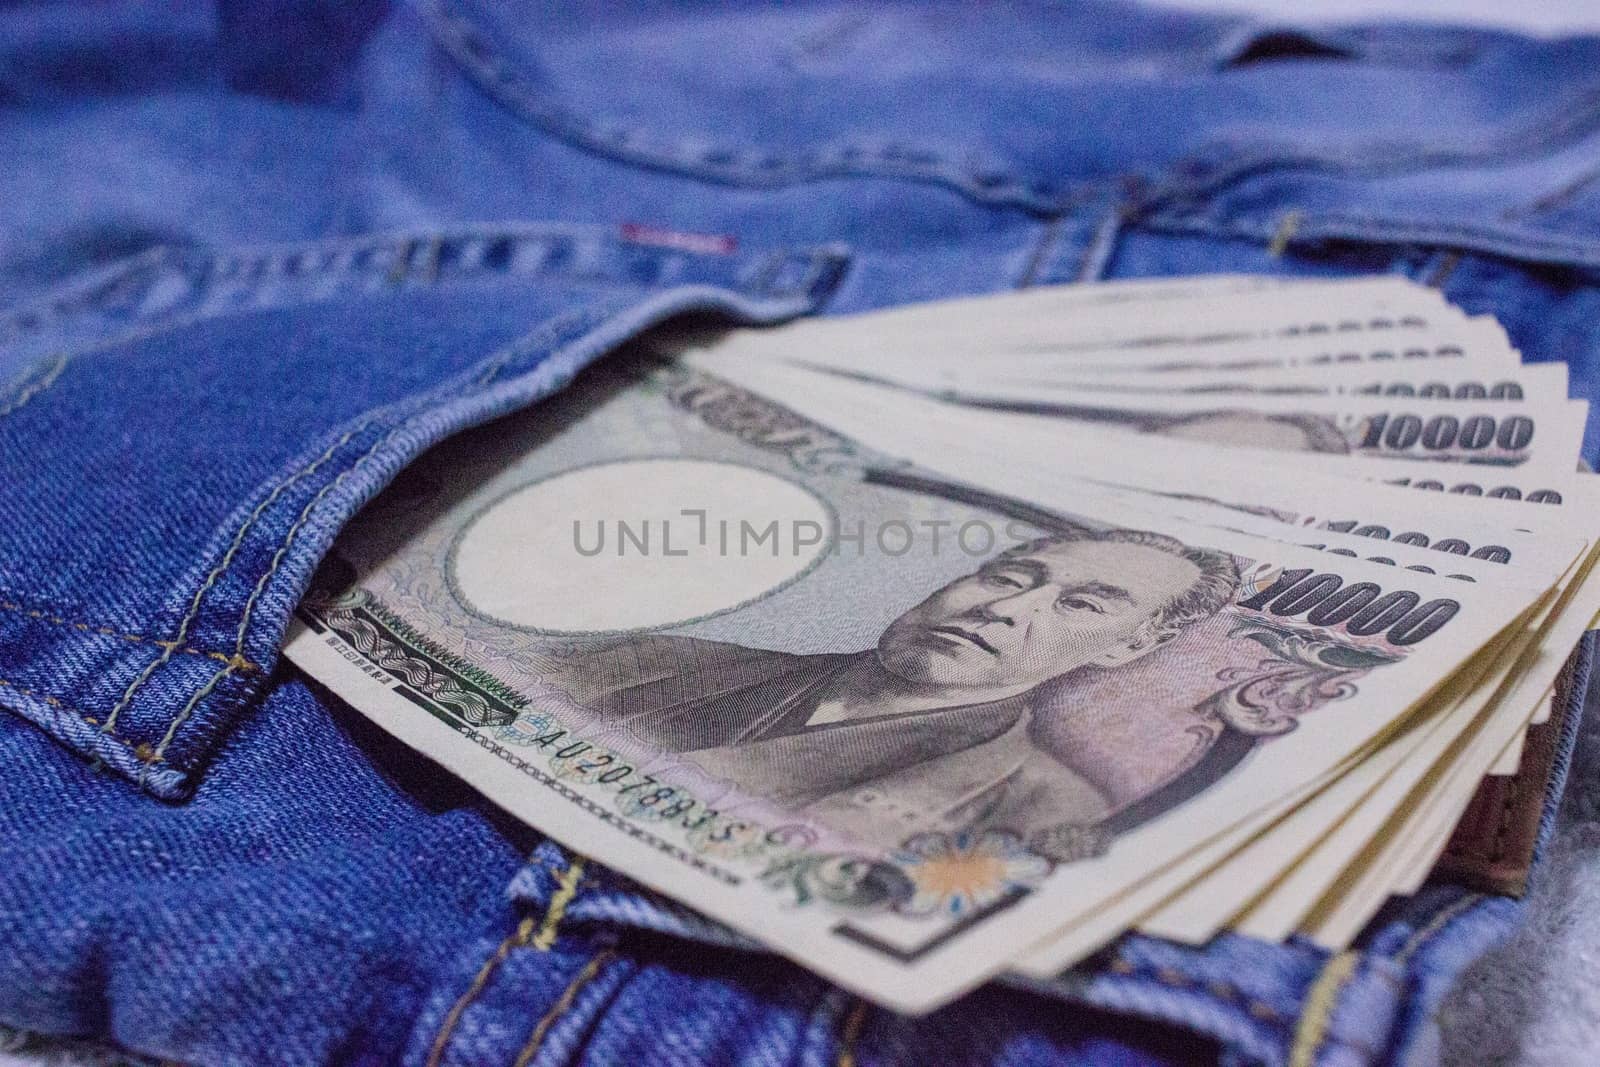 Japanese bank notes in pocket of jeans. by blueandrew8000@hotmail.com